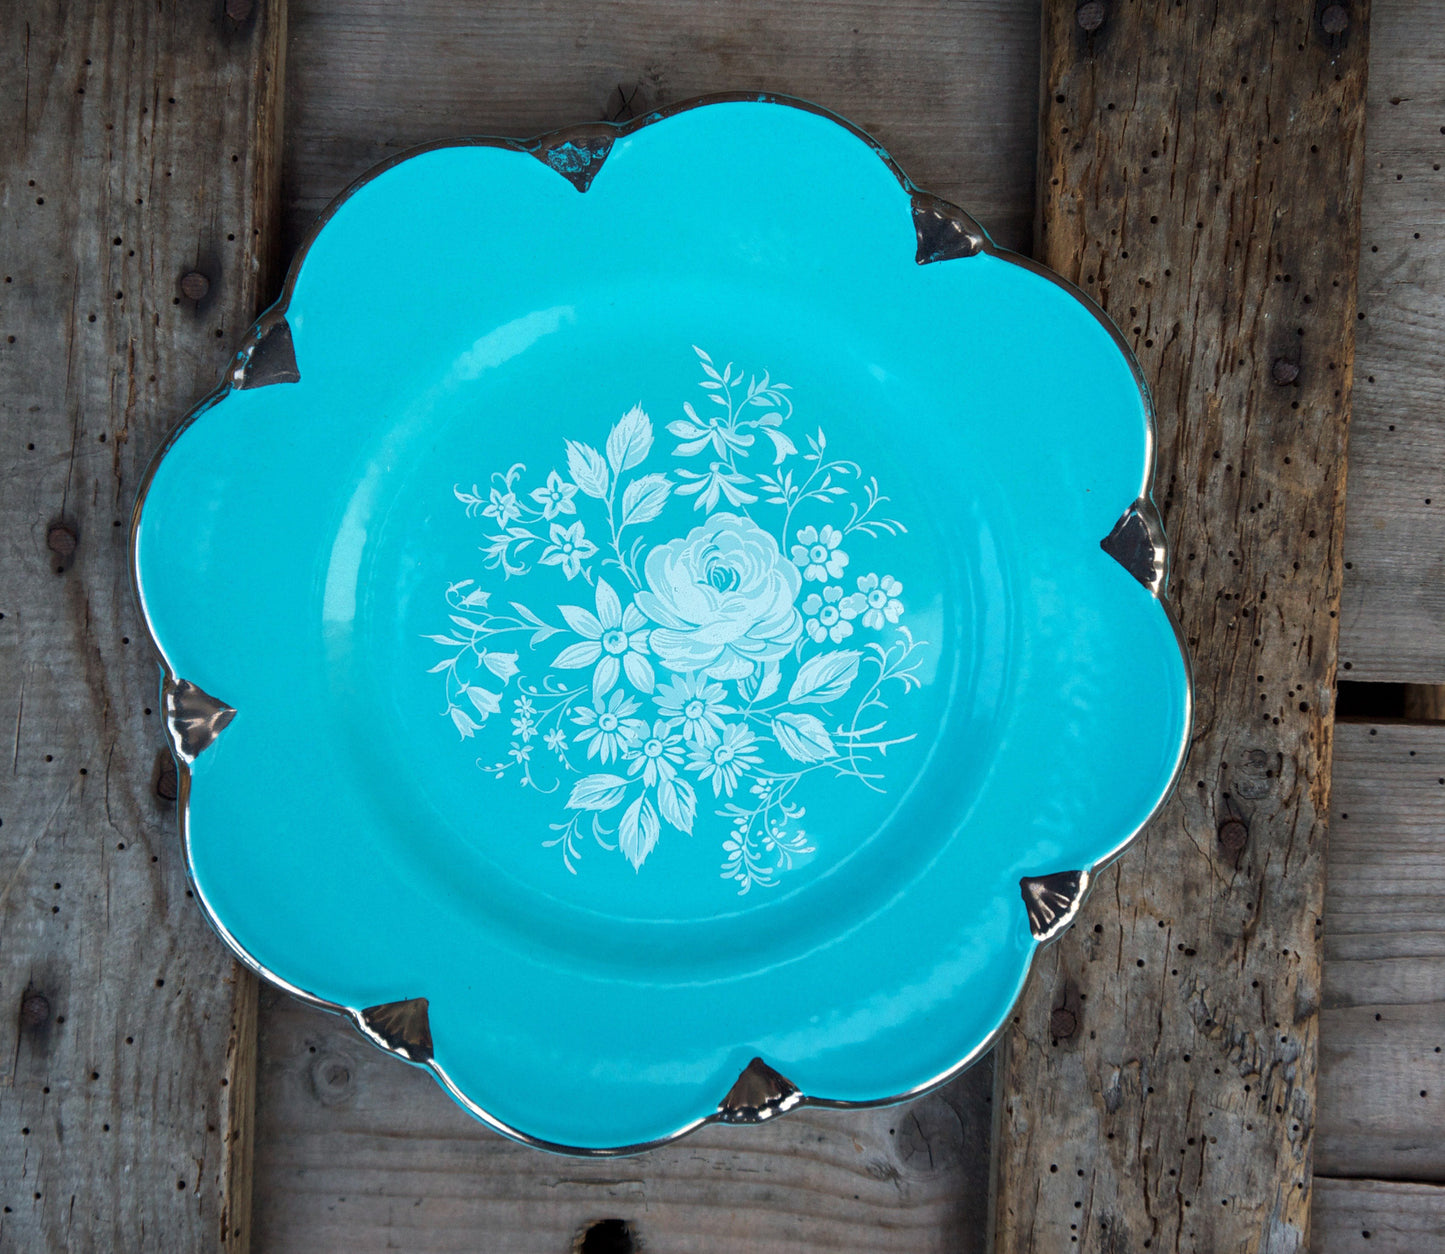 Vintage turquoise blue and white floral side plate